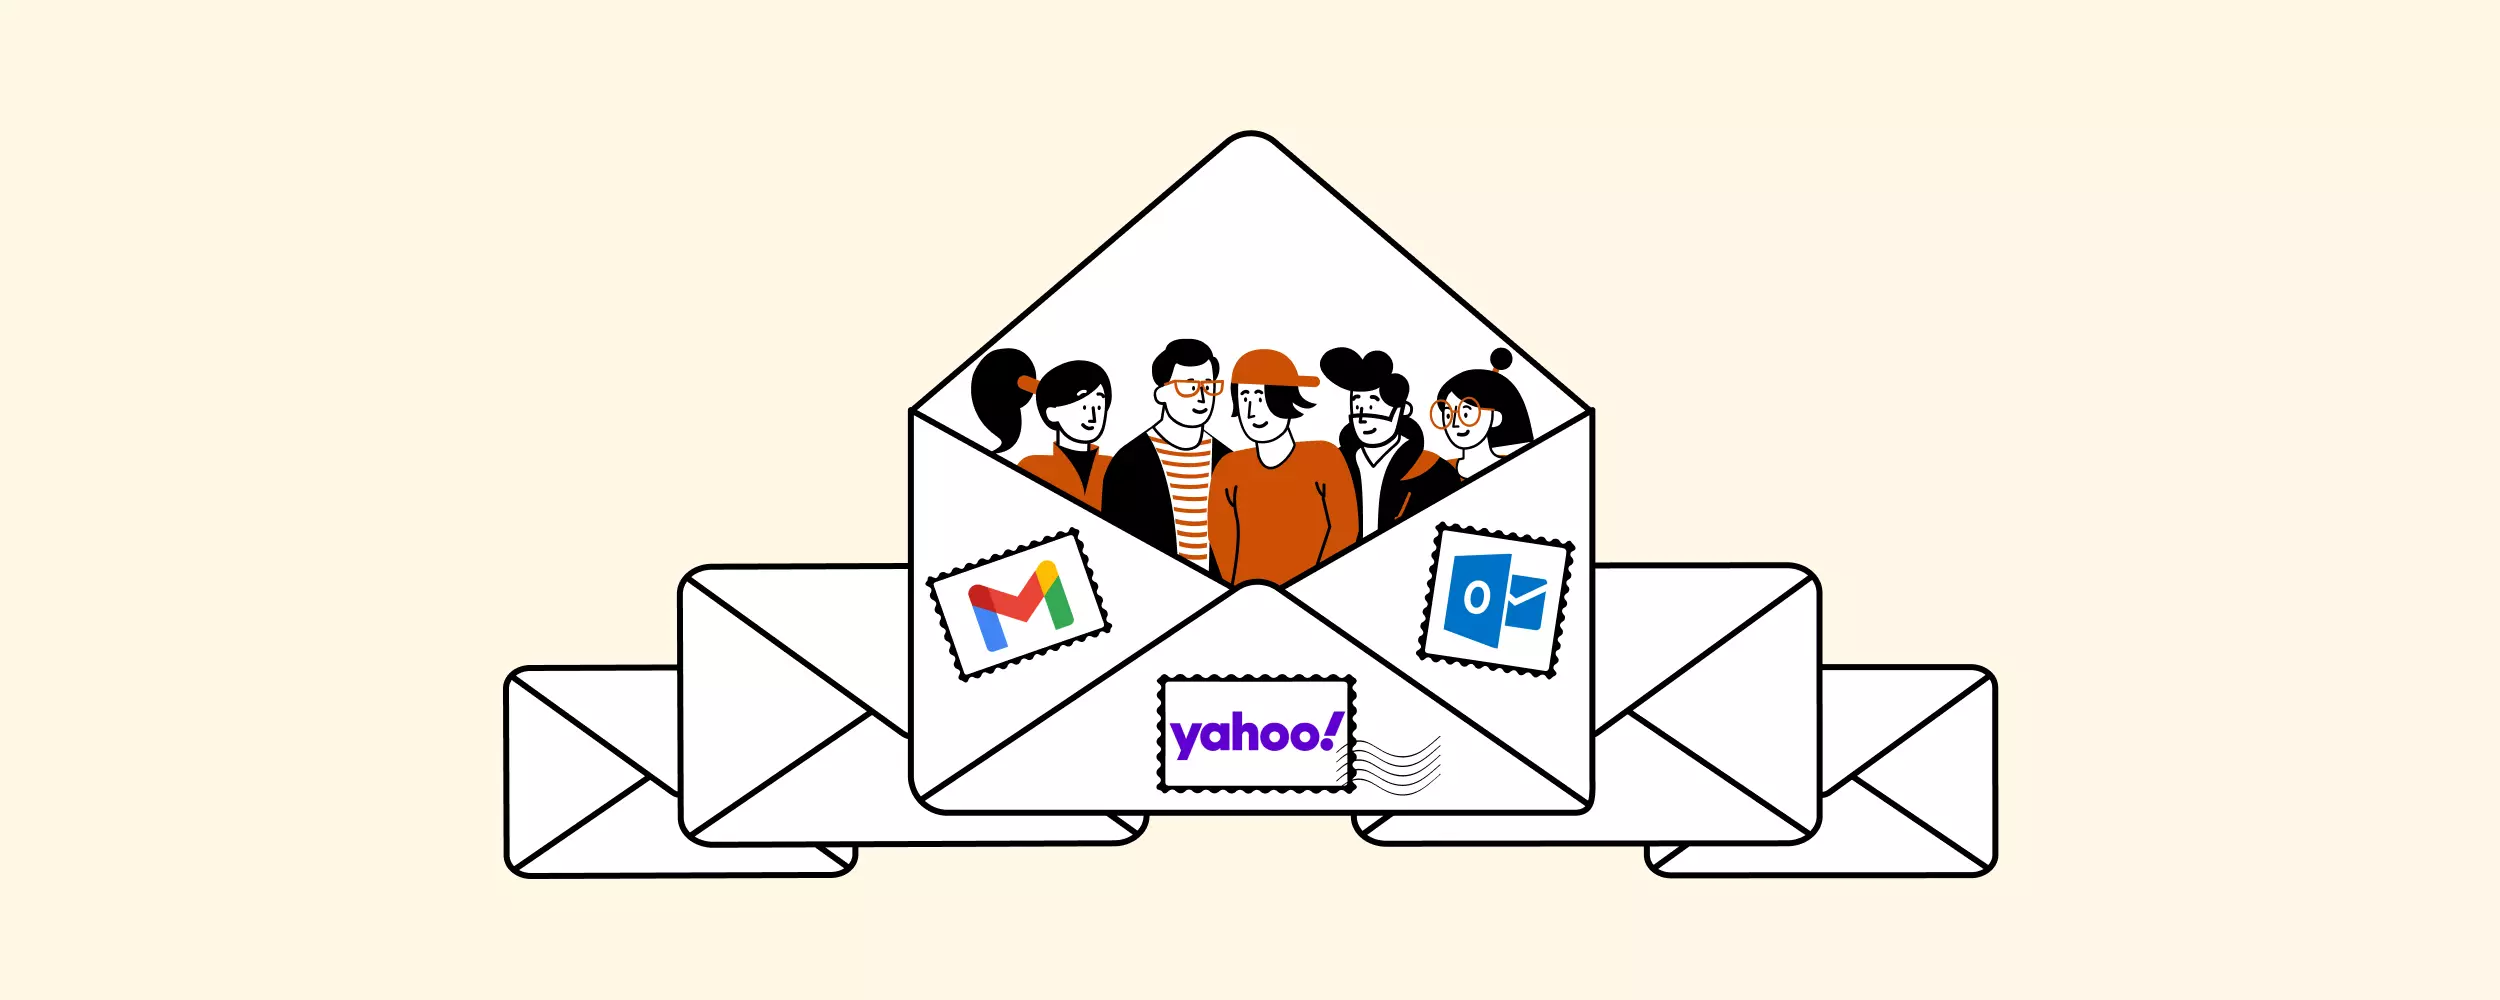 Yahoo Mail ! is NOW the SENDER of every email I send from my online  account as of Feb 13, 2020